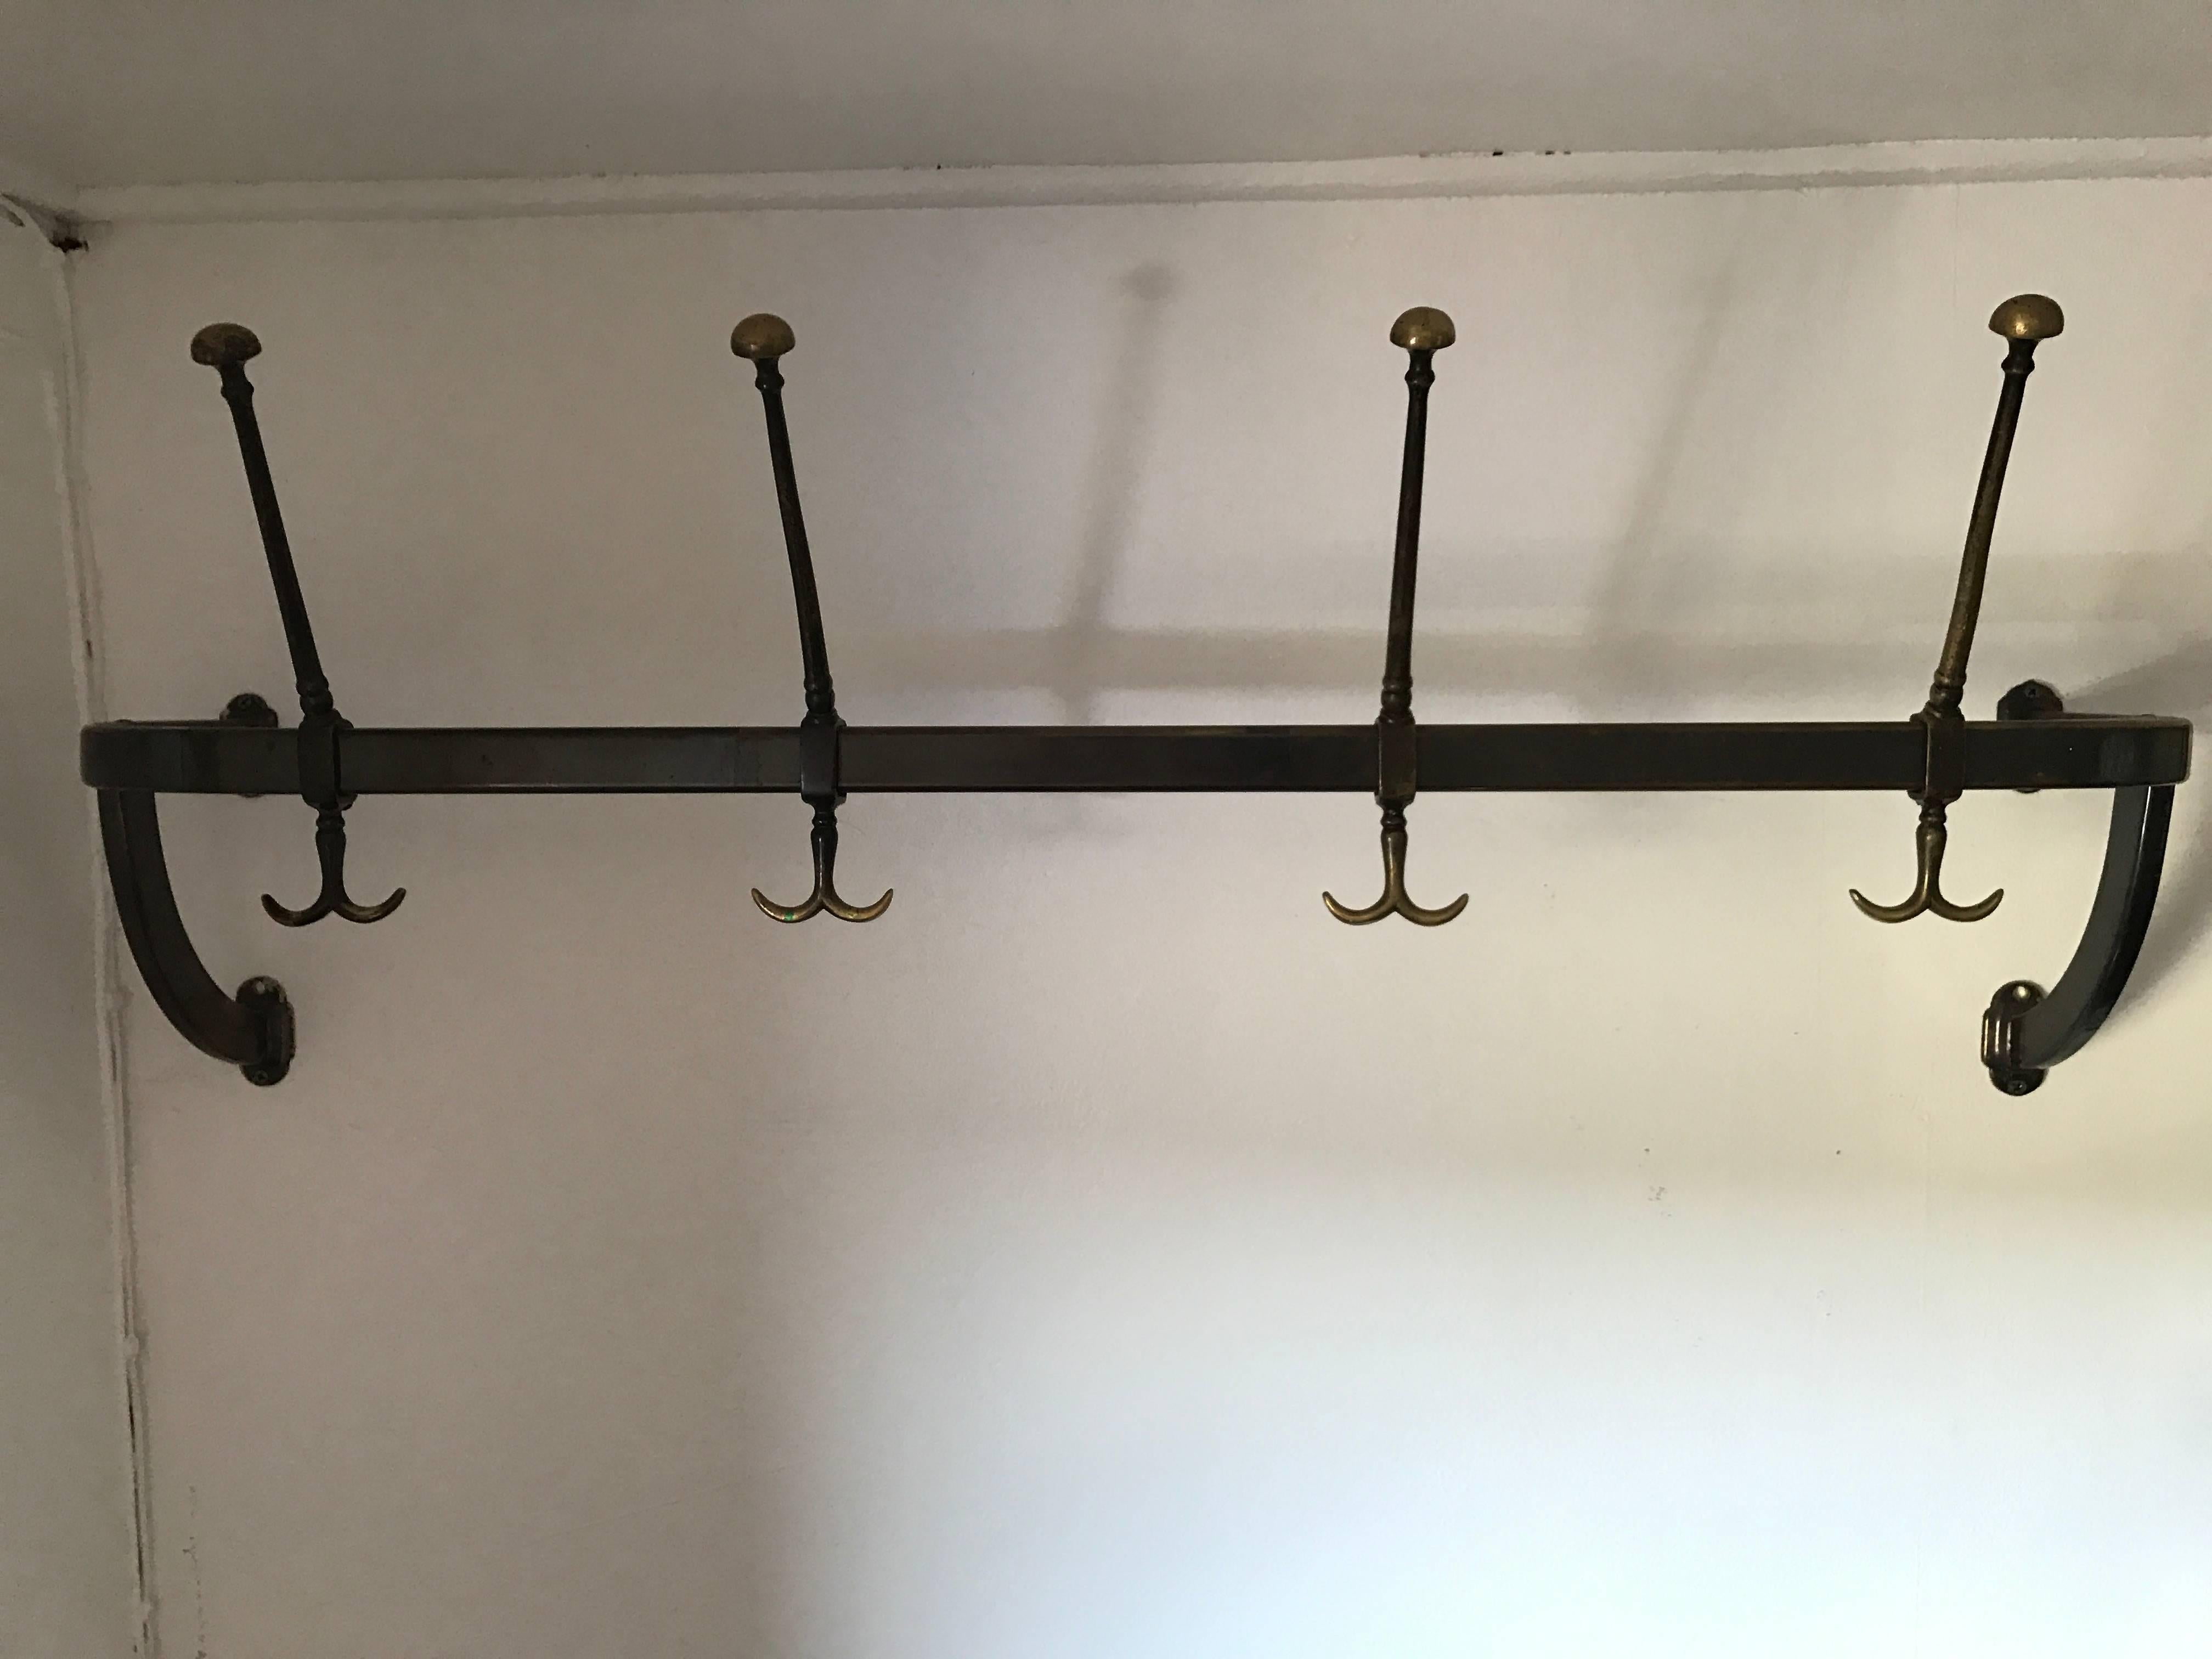 Italian or French brass Art Nouveau Jugendstil hat and coat rack, 1920. A very beautiful, clean and sober rack made of brass and most likely made in France or Italy in the first quarter of the 20th century. The patina on this rack is just fantastic